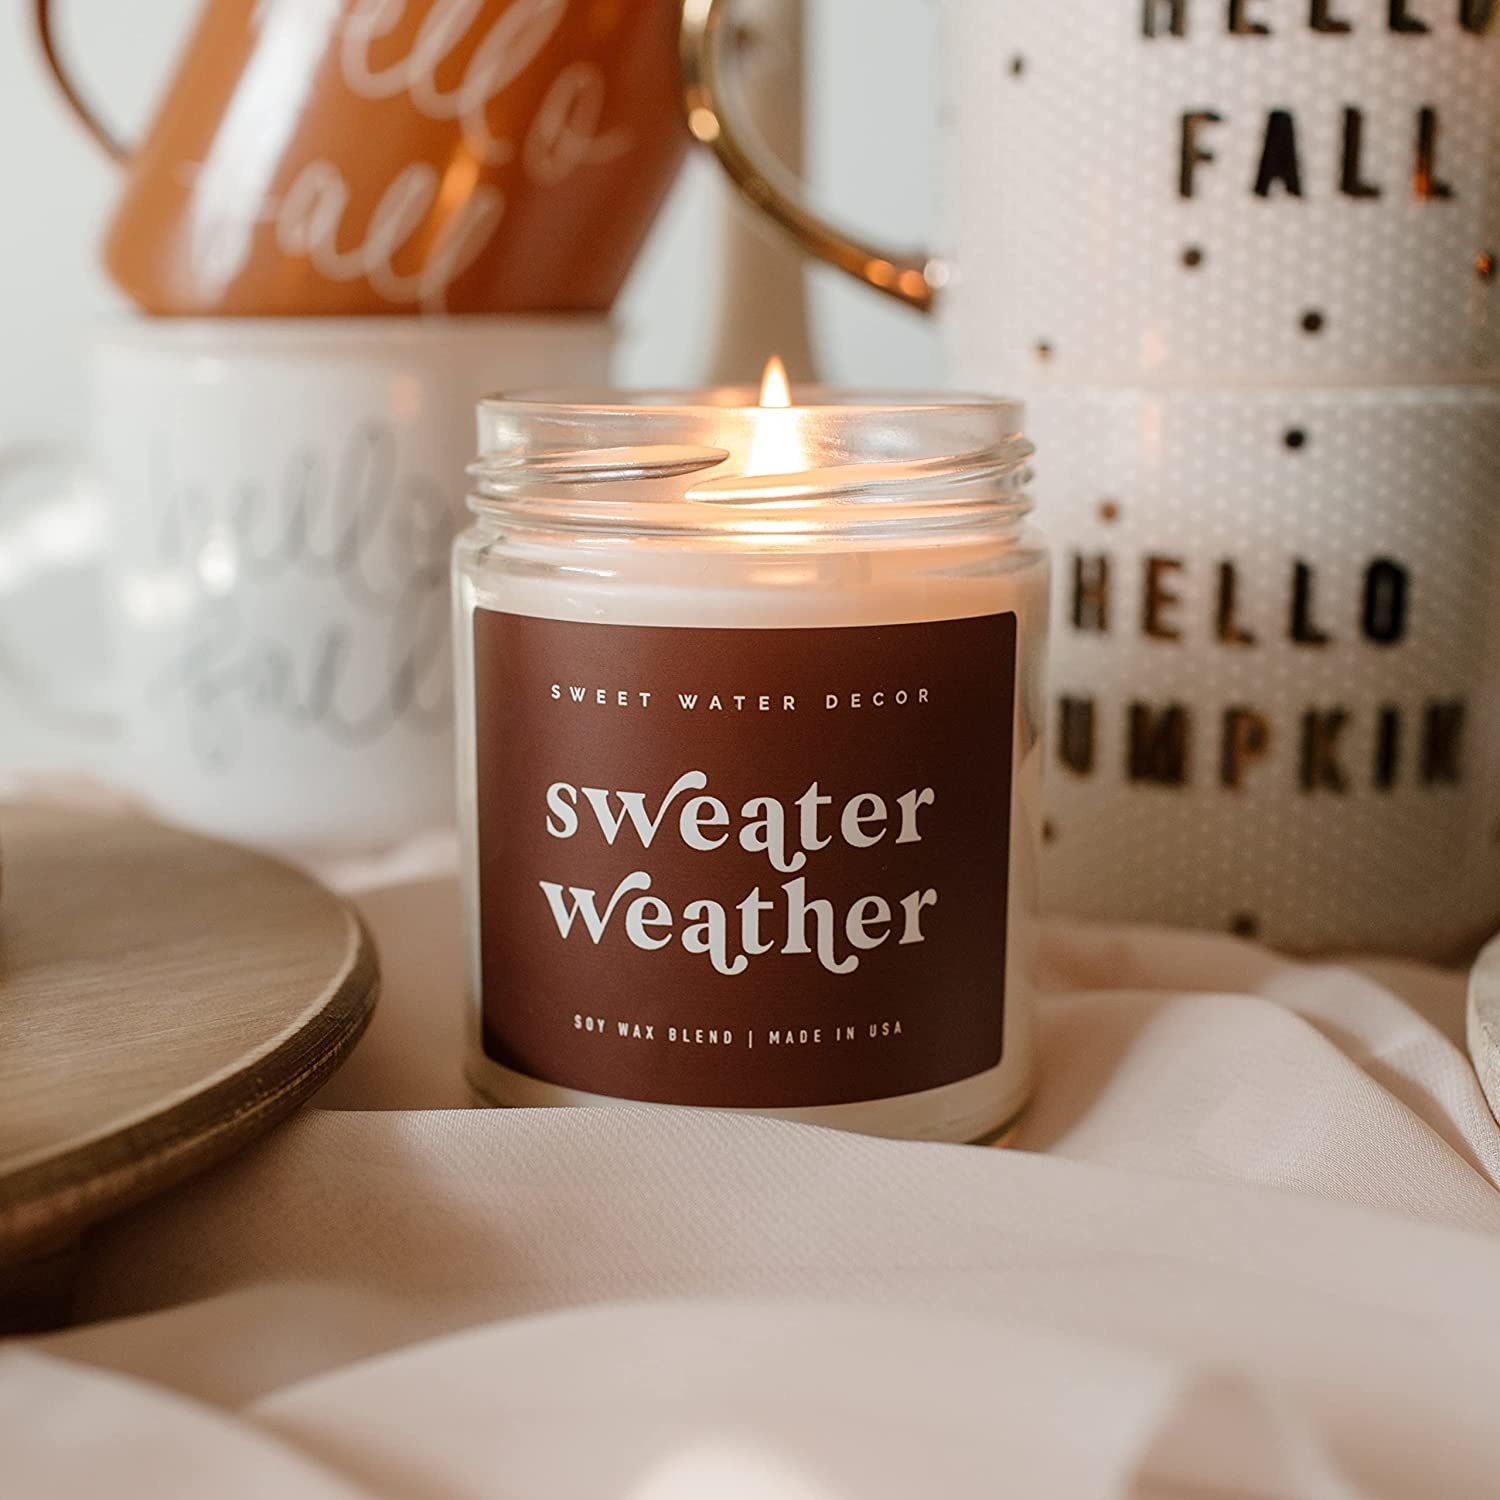 the sweater weather candle lit and burning